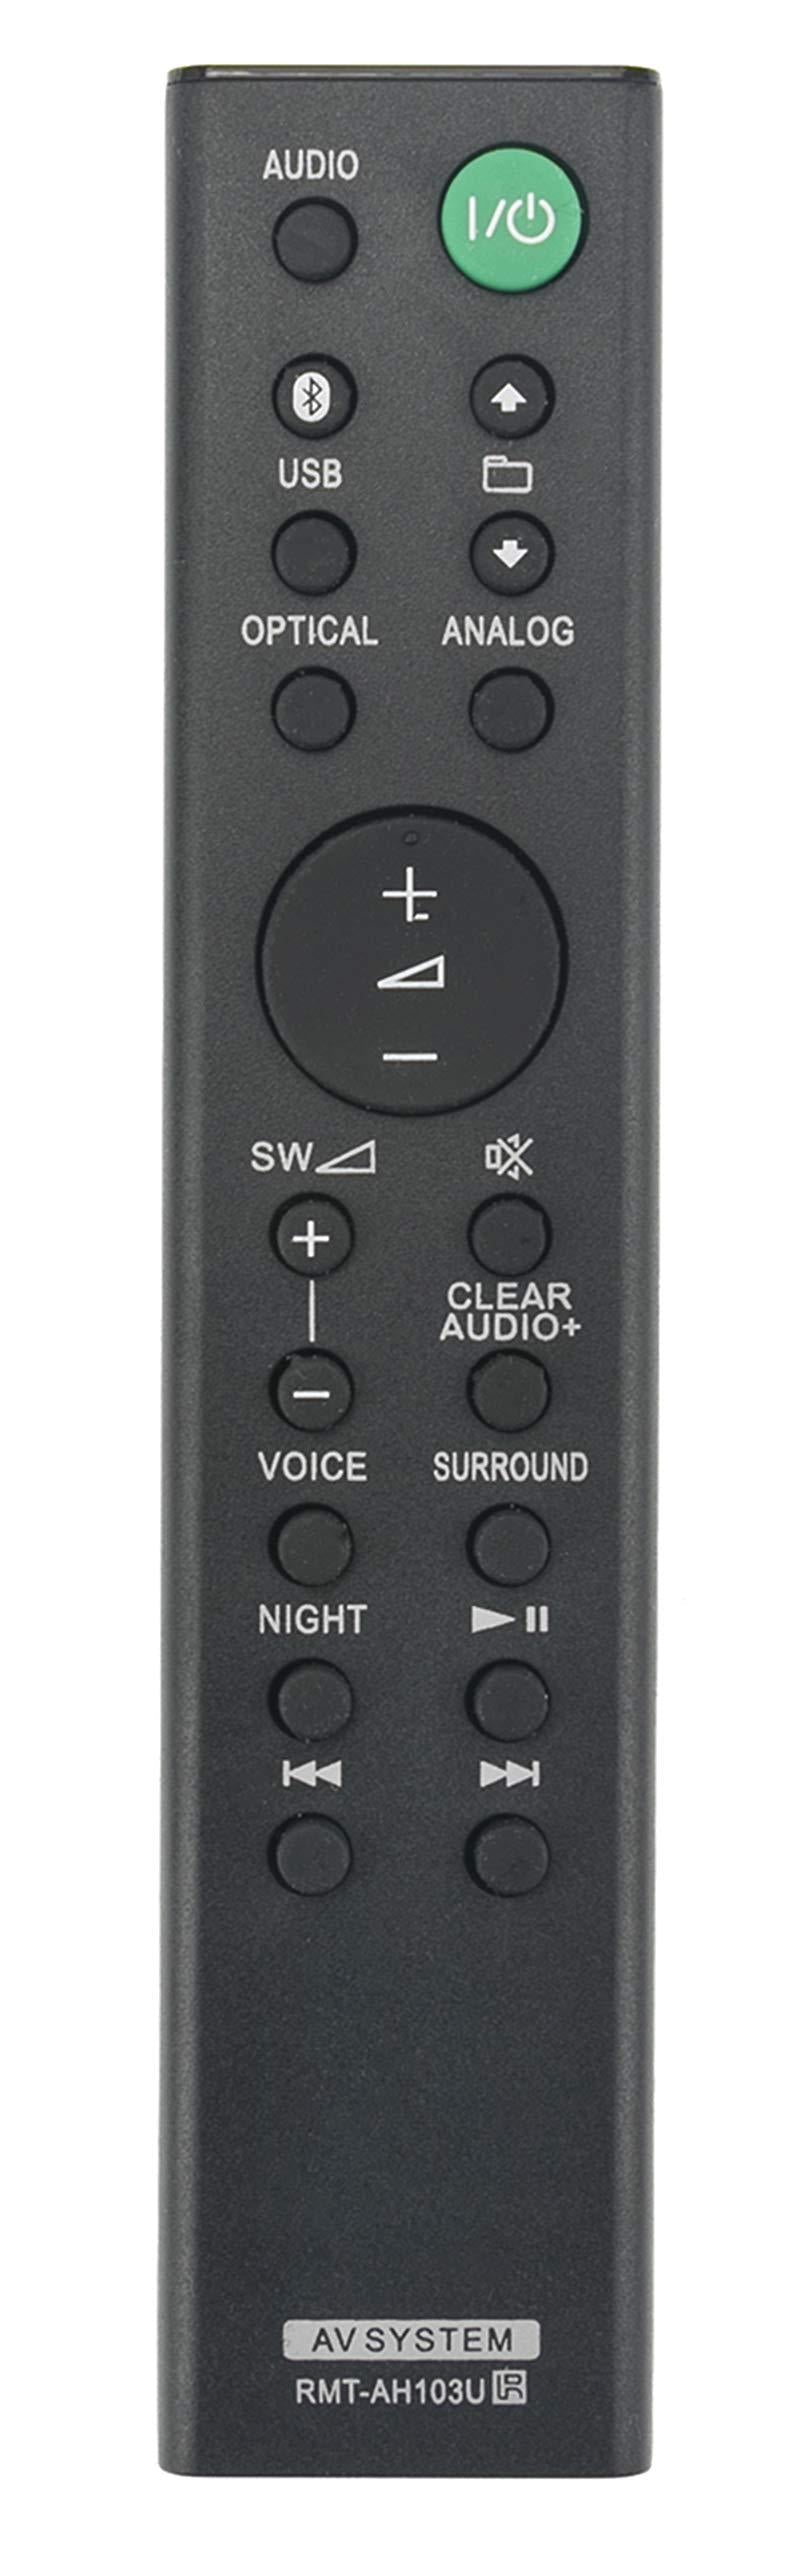 New RMT-AH103U Replaced Remote fit for Sony Sound Bar HT-CT80 SA-CT80 HTCT80 SACT80 HT-CT180 SA-CT180 RMT-AH100U SA-WCT180 SS-WCT80 - LeoForward Australia